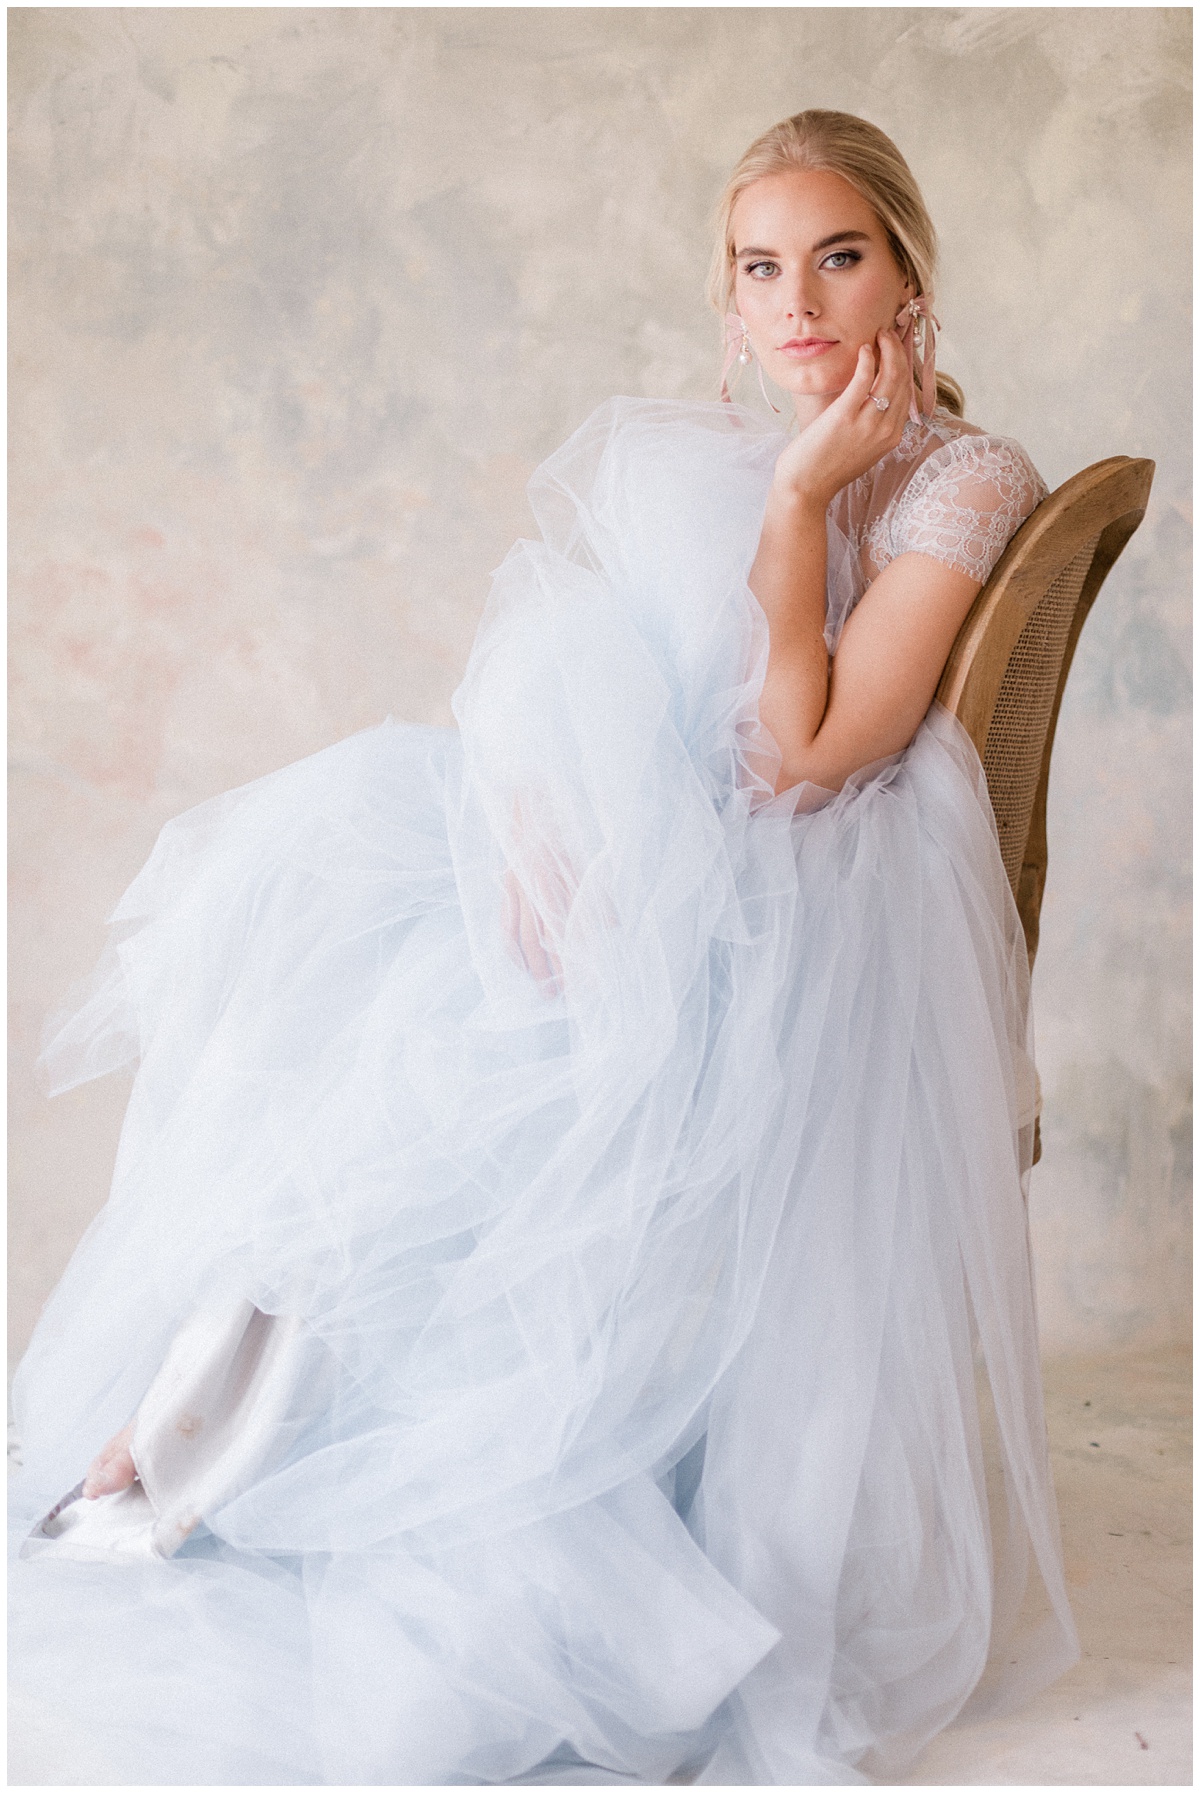 gorgeous blonde bride poses in a chair with her dress splayed all around her. Comfort and Cashmere Weddings.